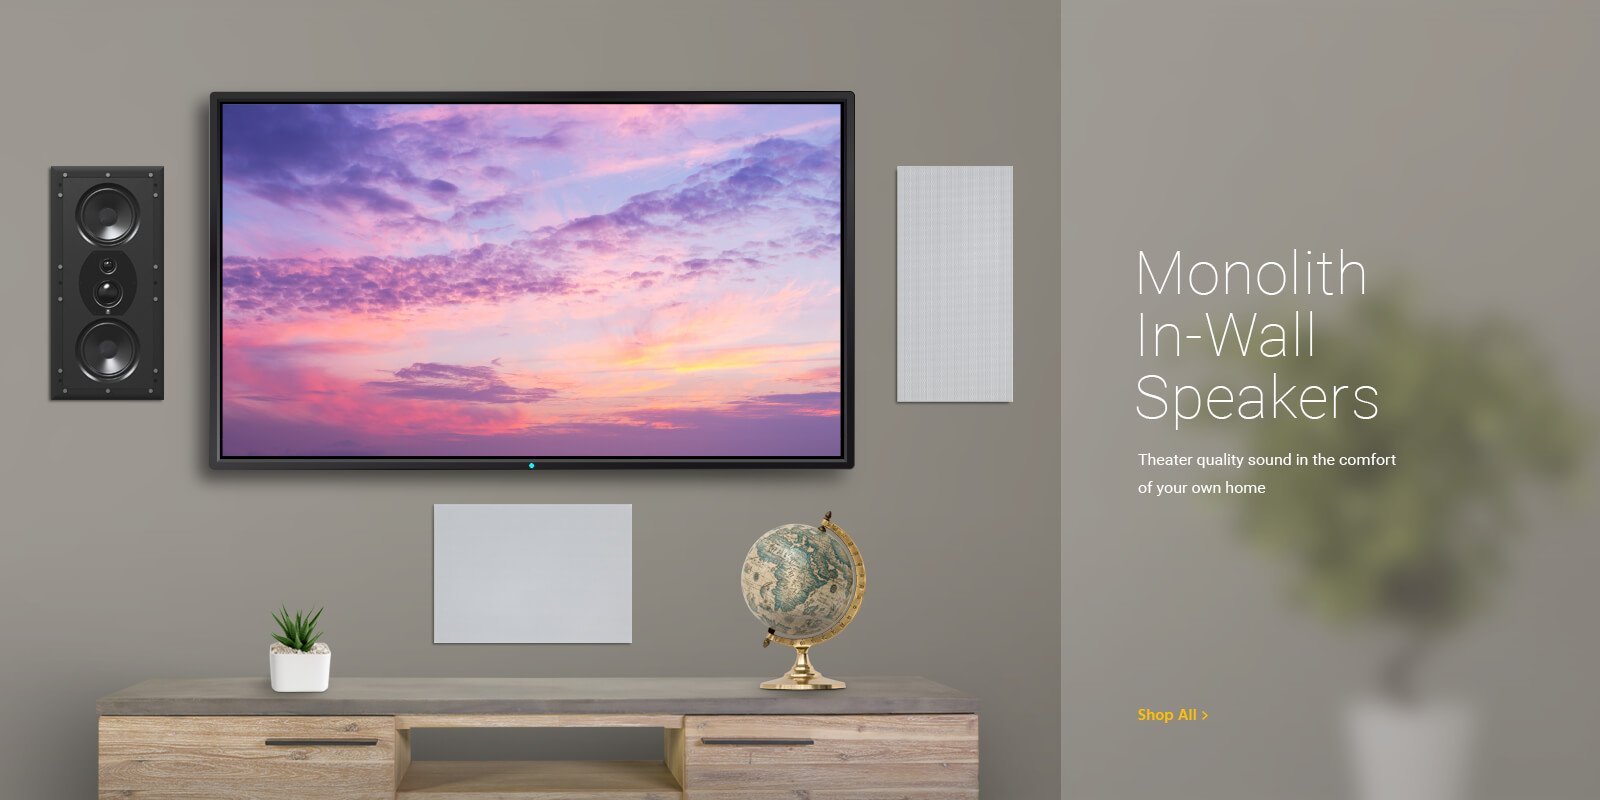 Monolith In-Wall Speakers, theater quality sound in the comfort of your own home. Shop All